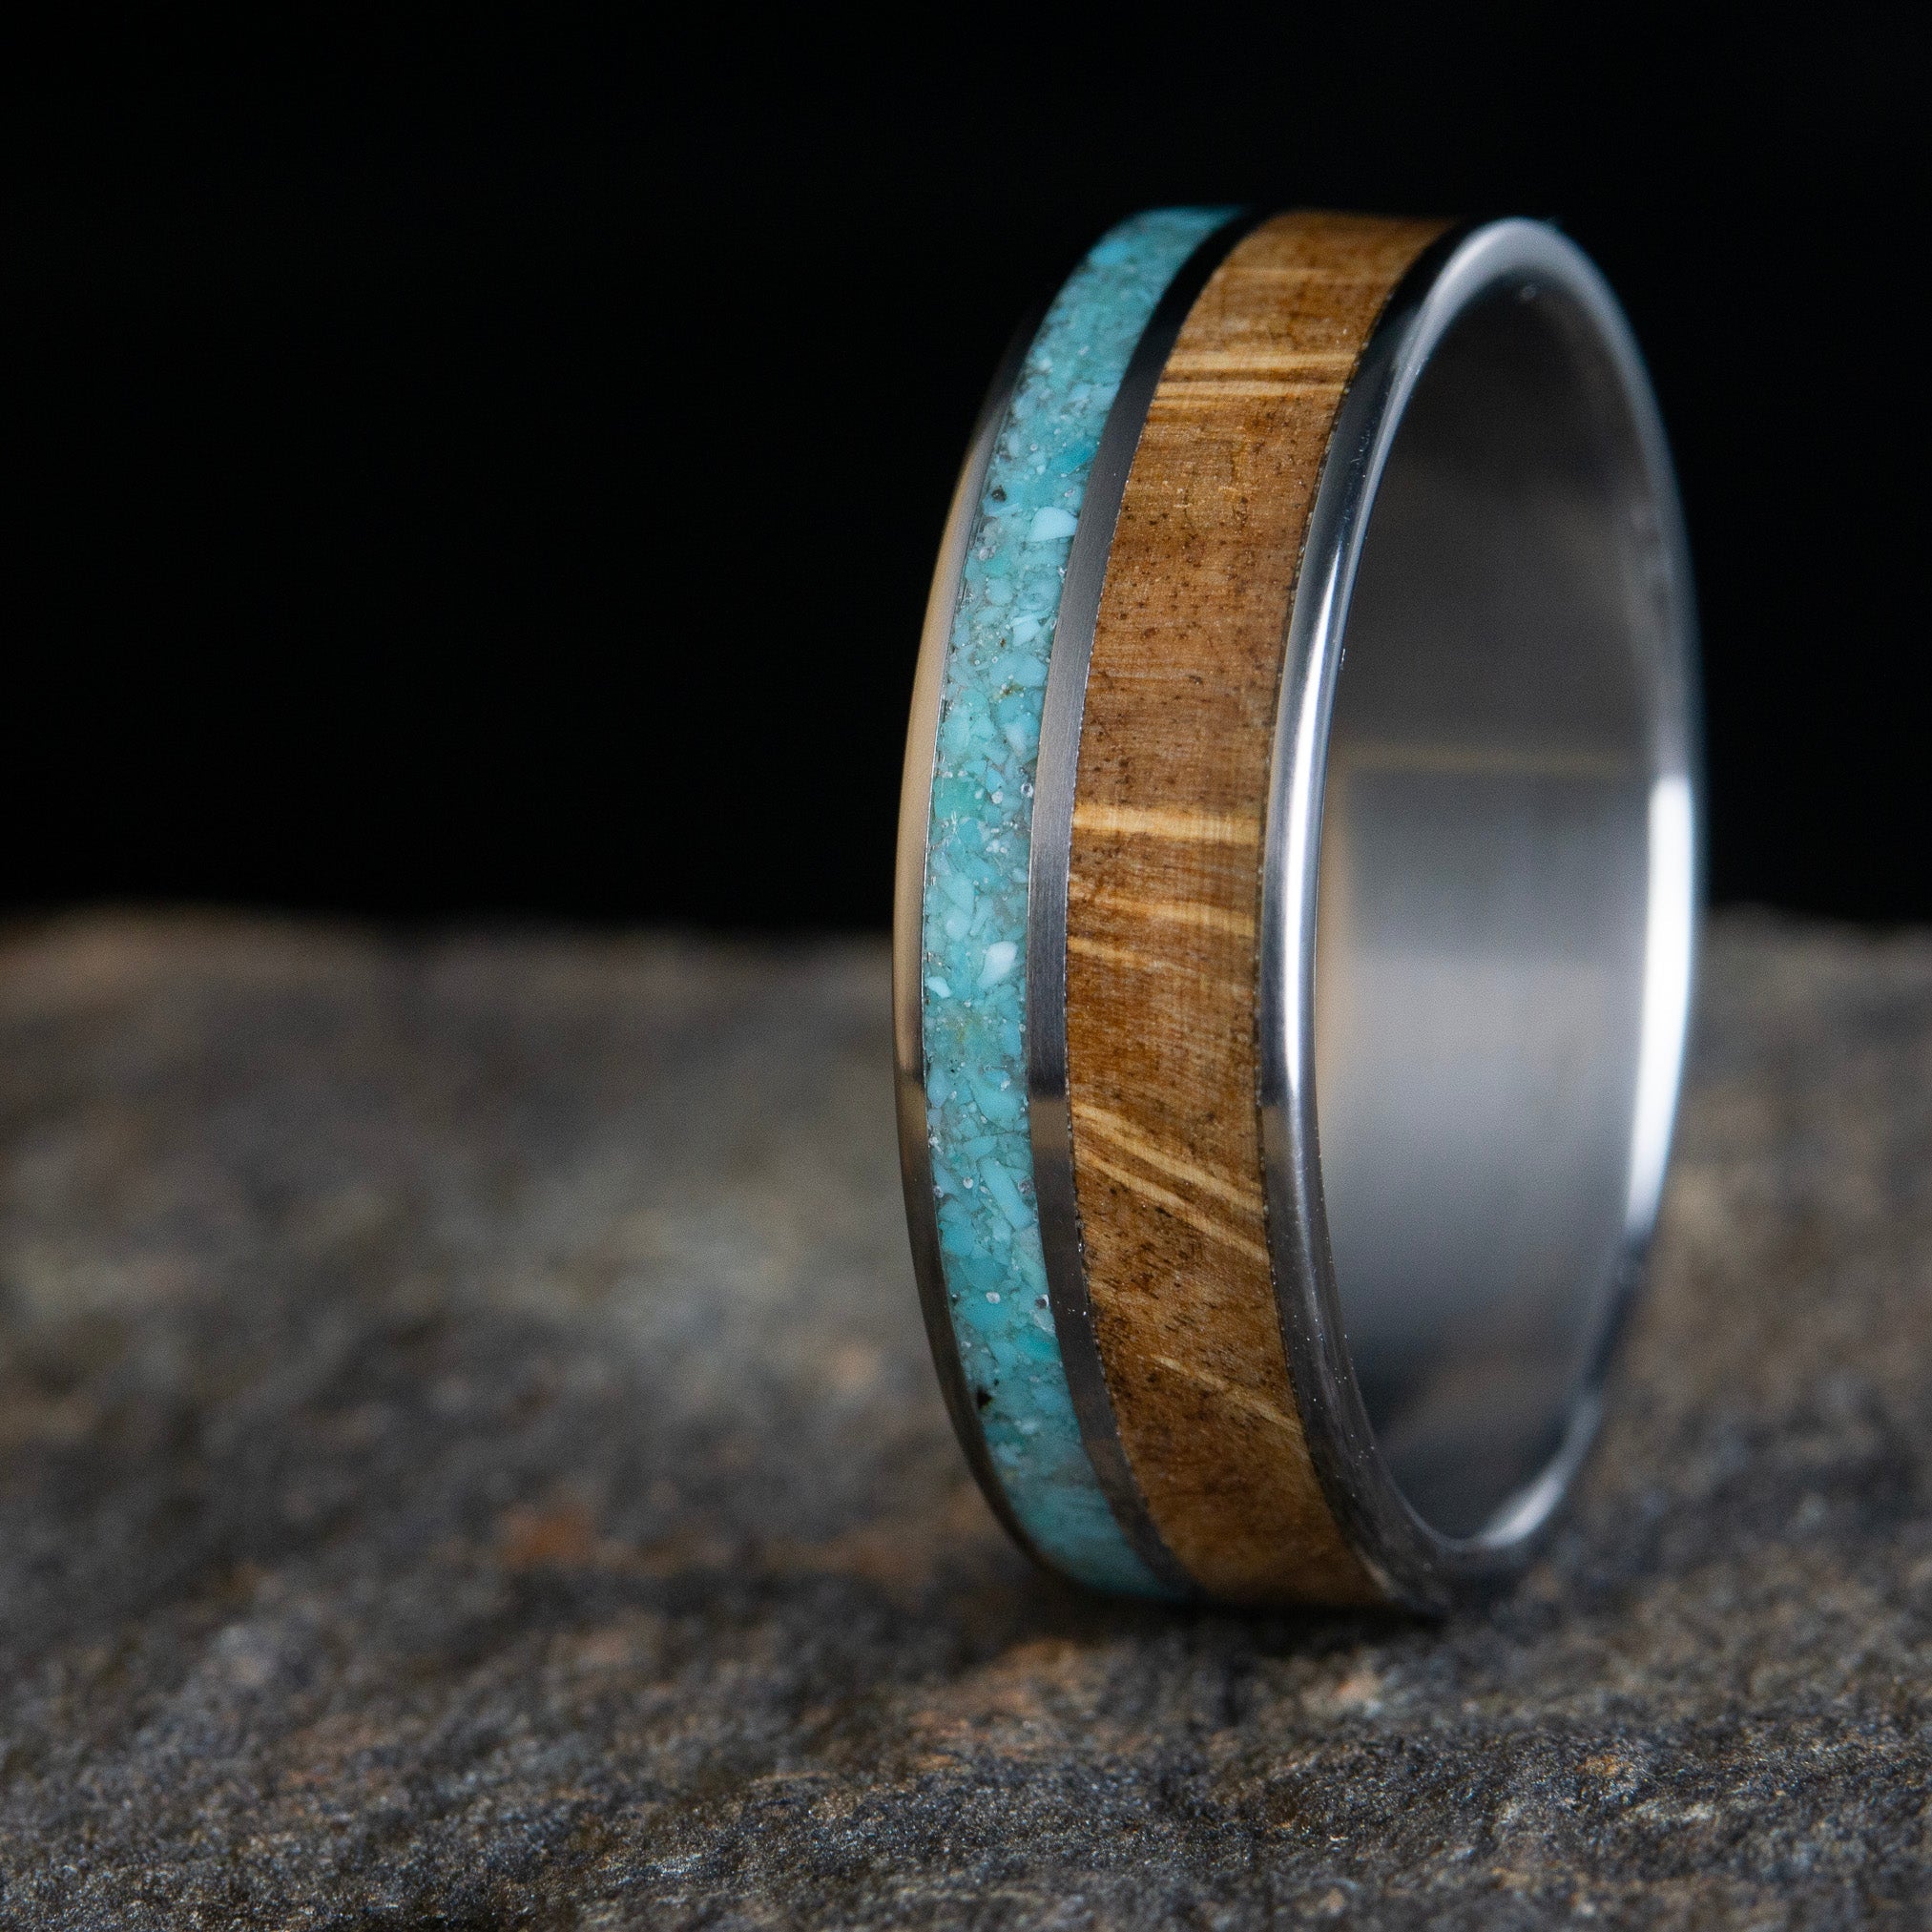 Oak burl wood with a turquoise inlay on titanium